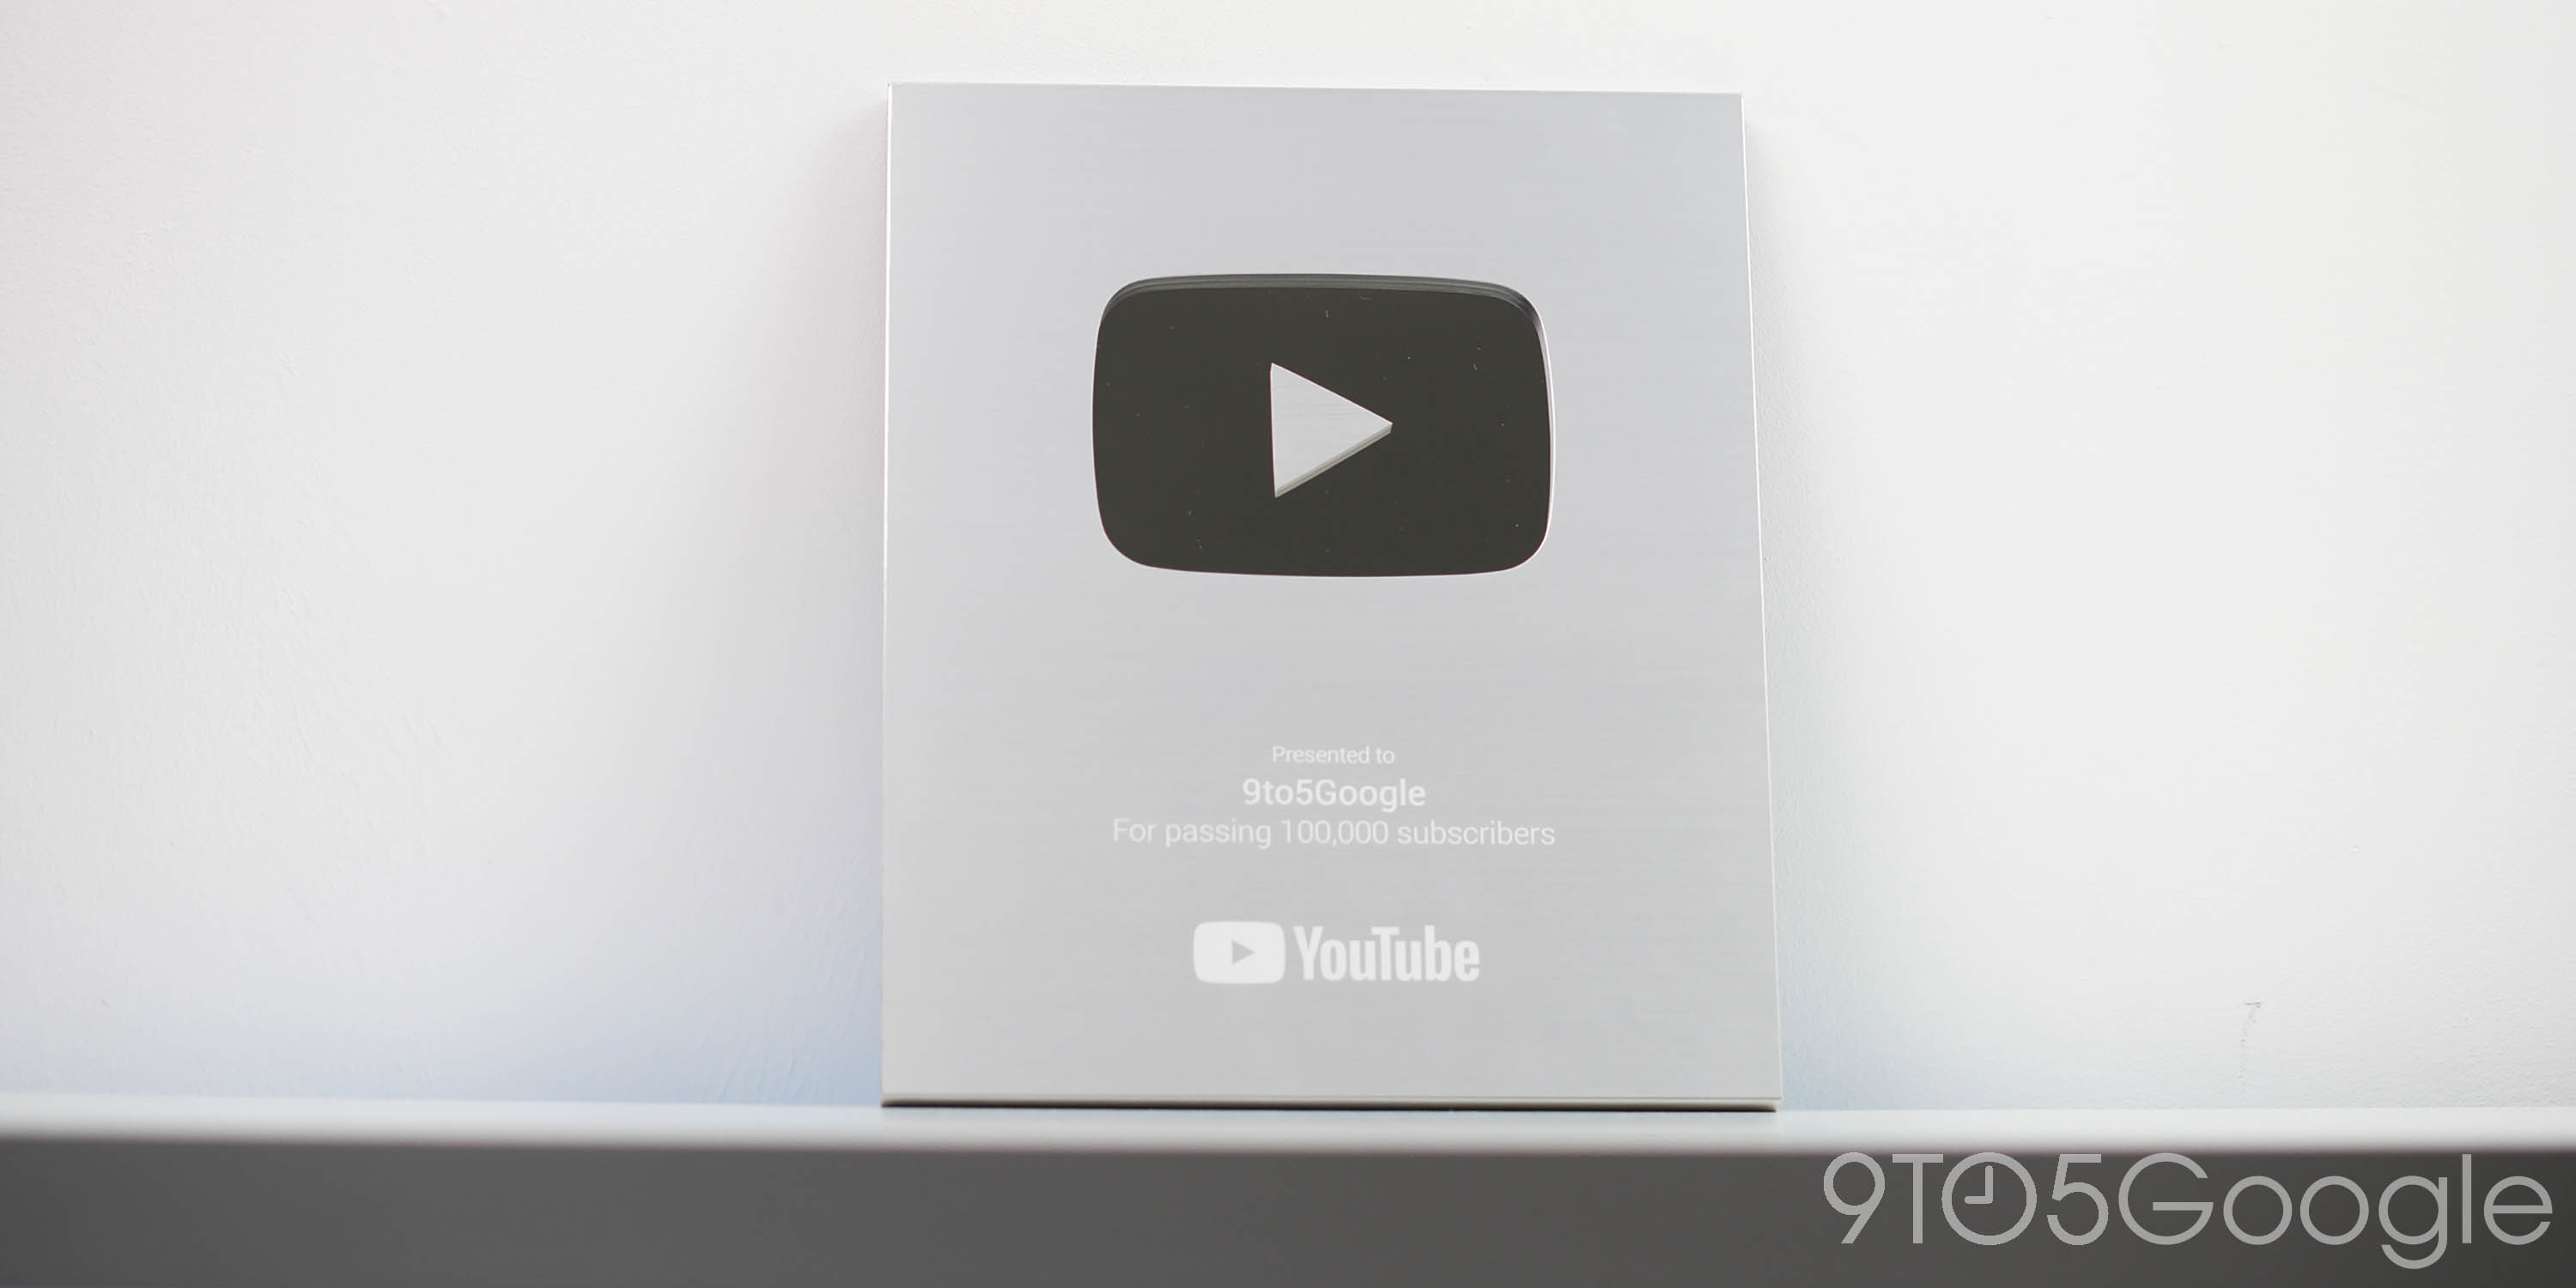 Youtube Silver Play Button How Do I Get One Video 9to5google